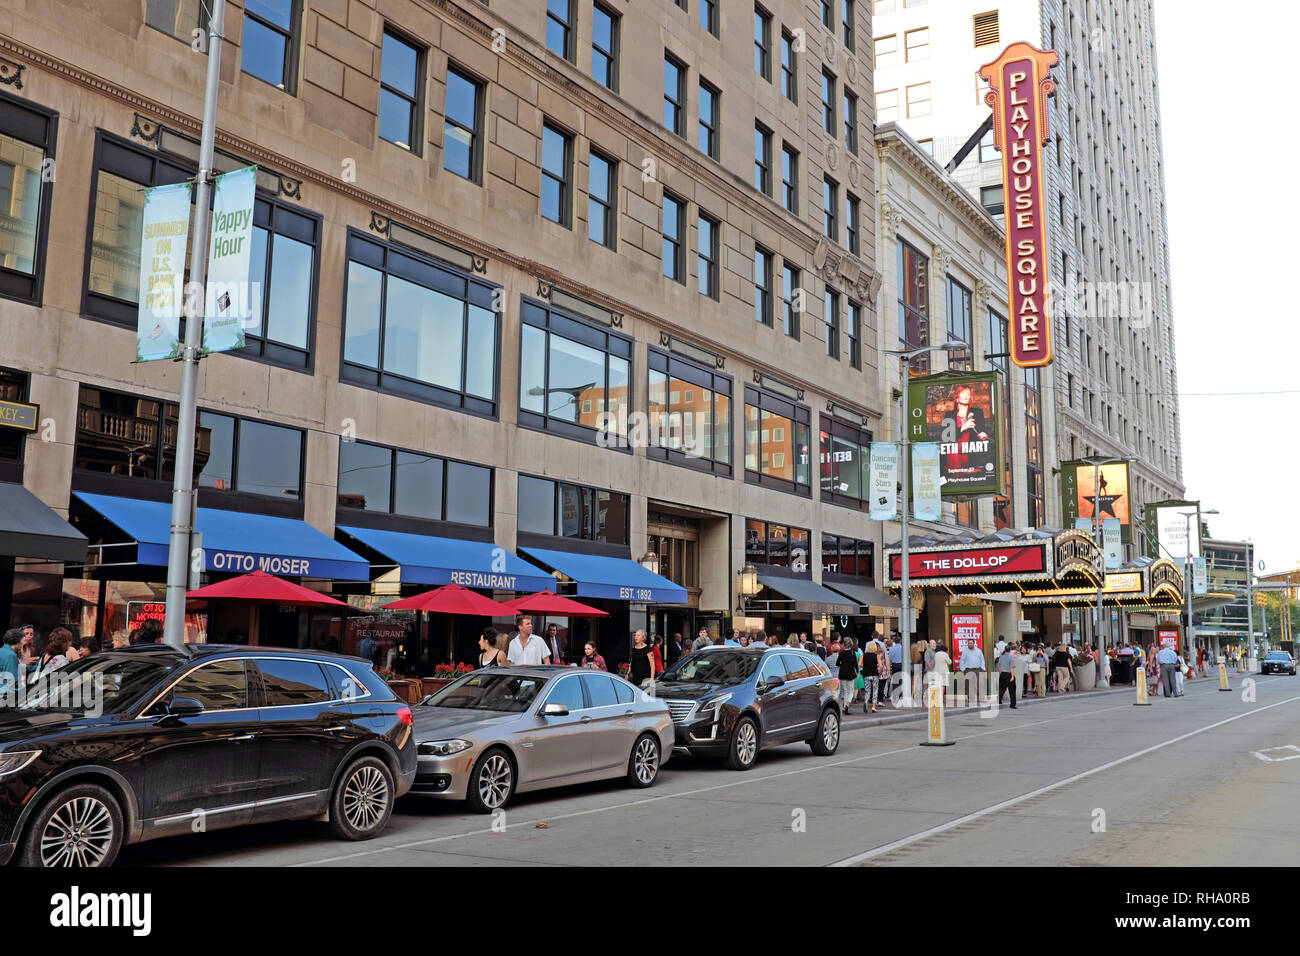 Several of the Playhouse Square theaters attracting theatergoers on a fall evening in downtown Cleveland, Ohio, USA. Stock Photo